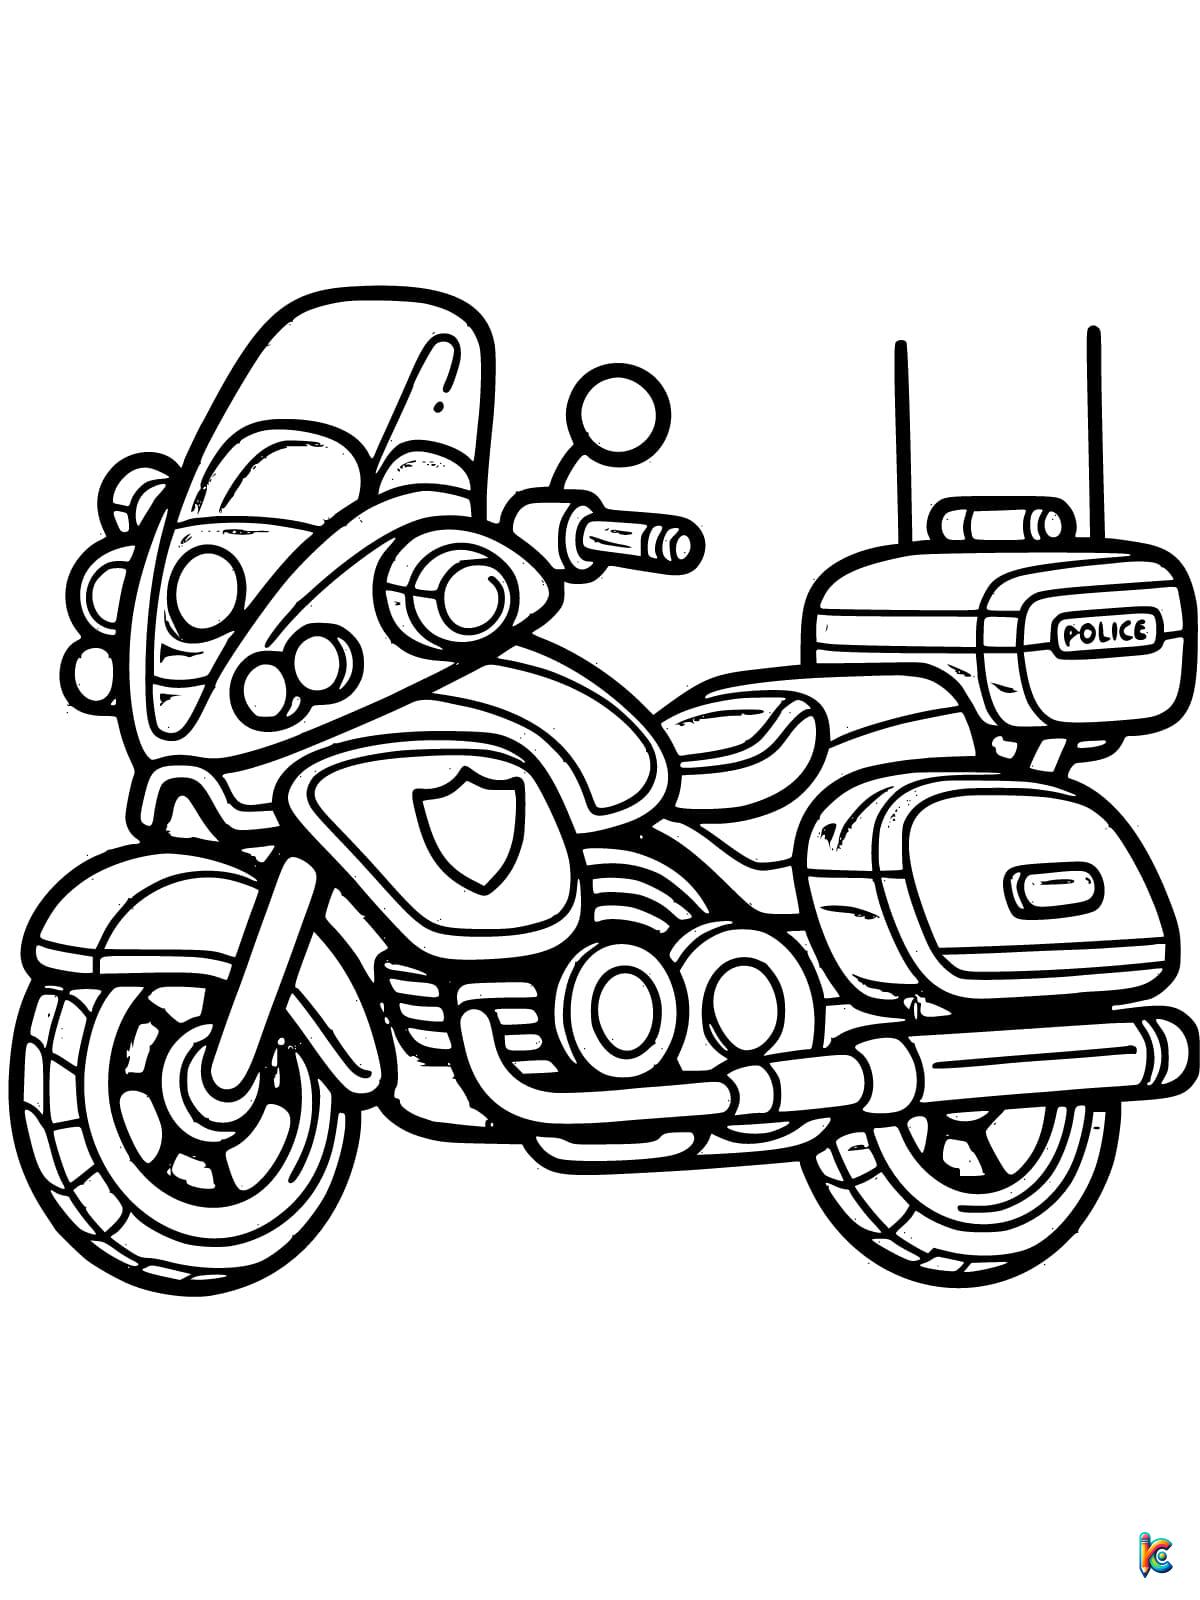 police motorcycle coloring pages printable